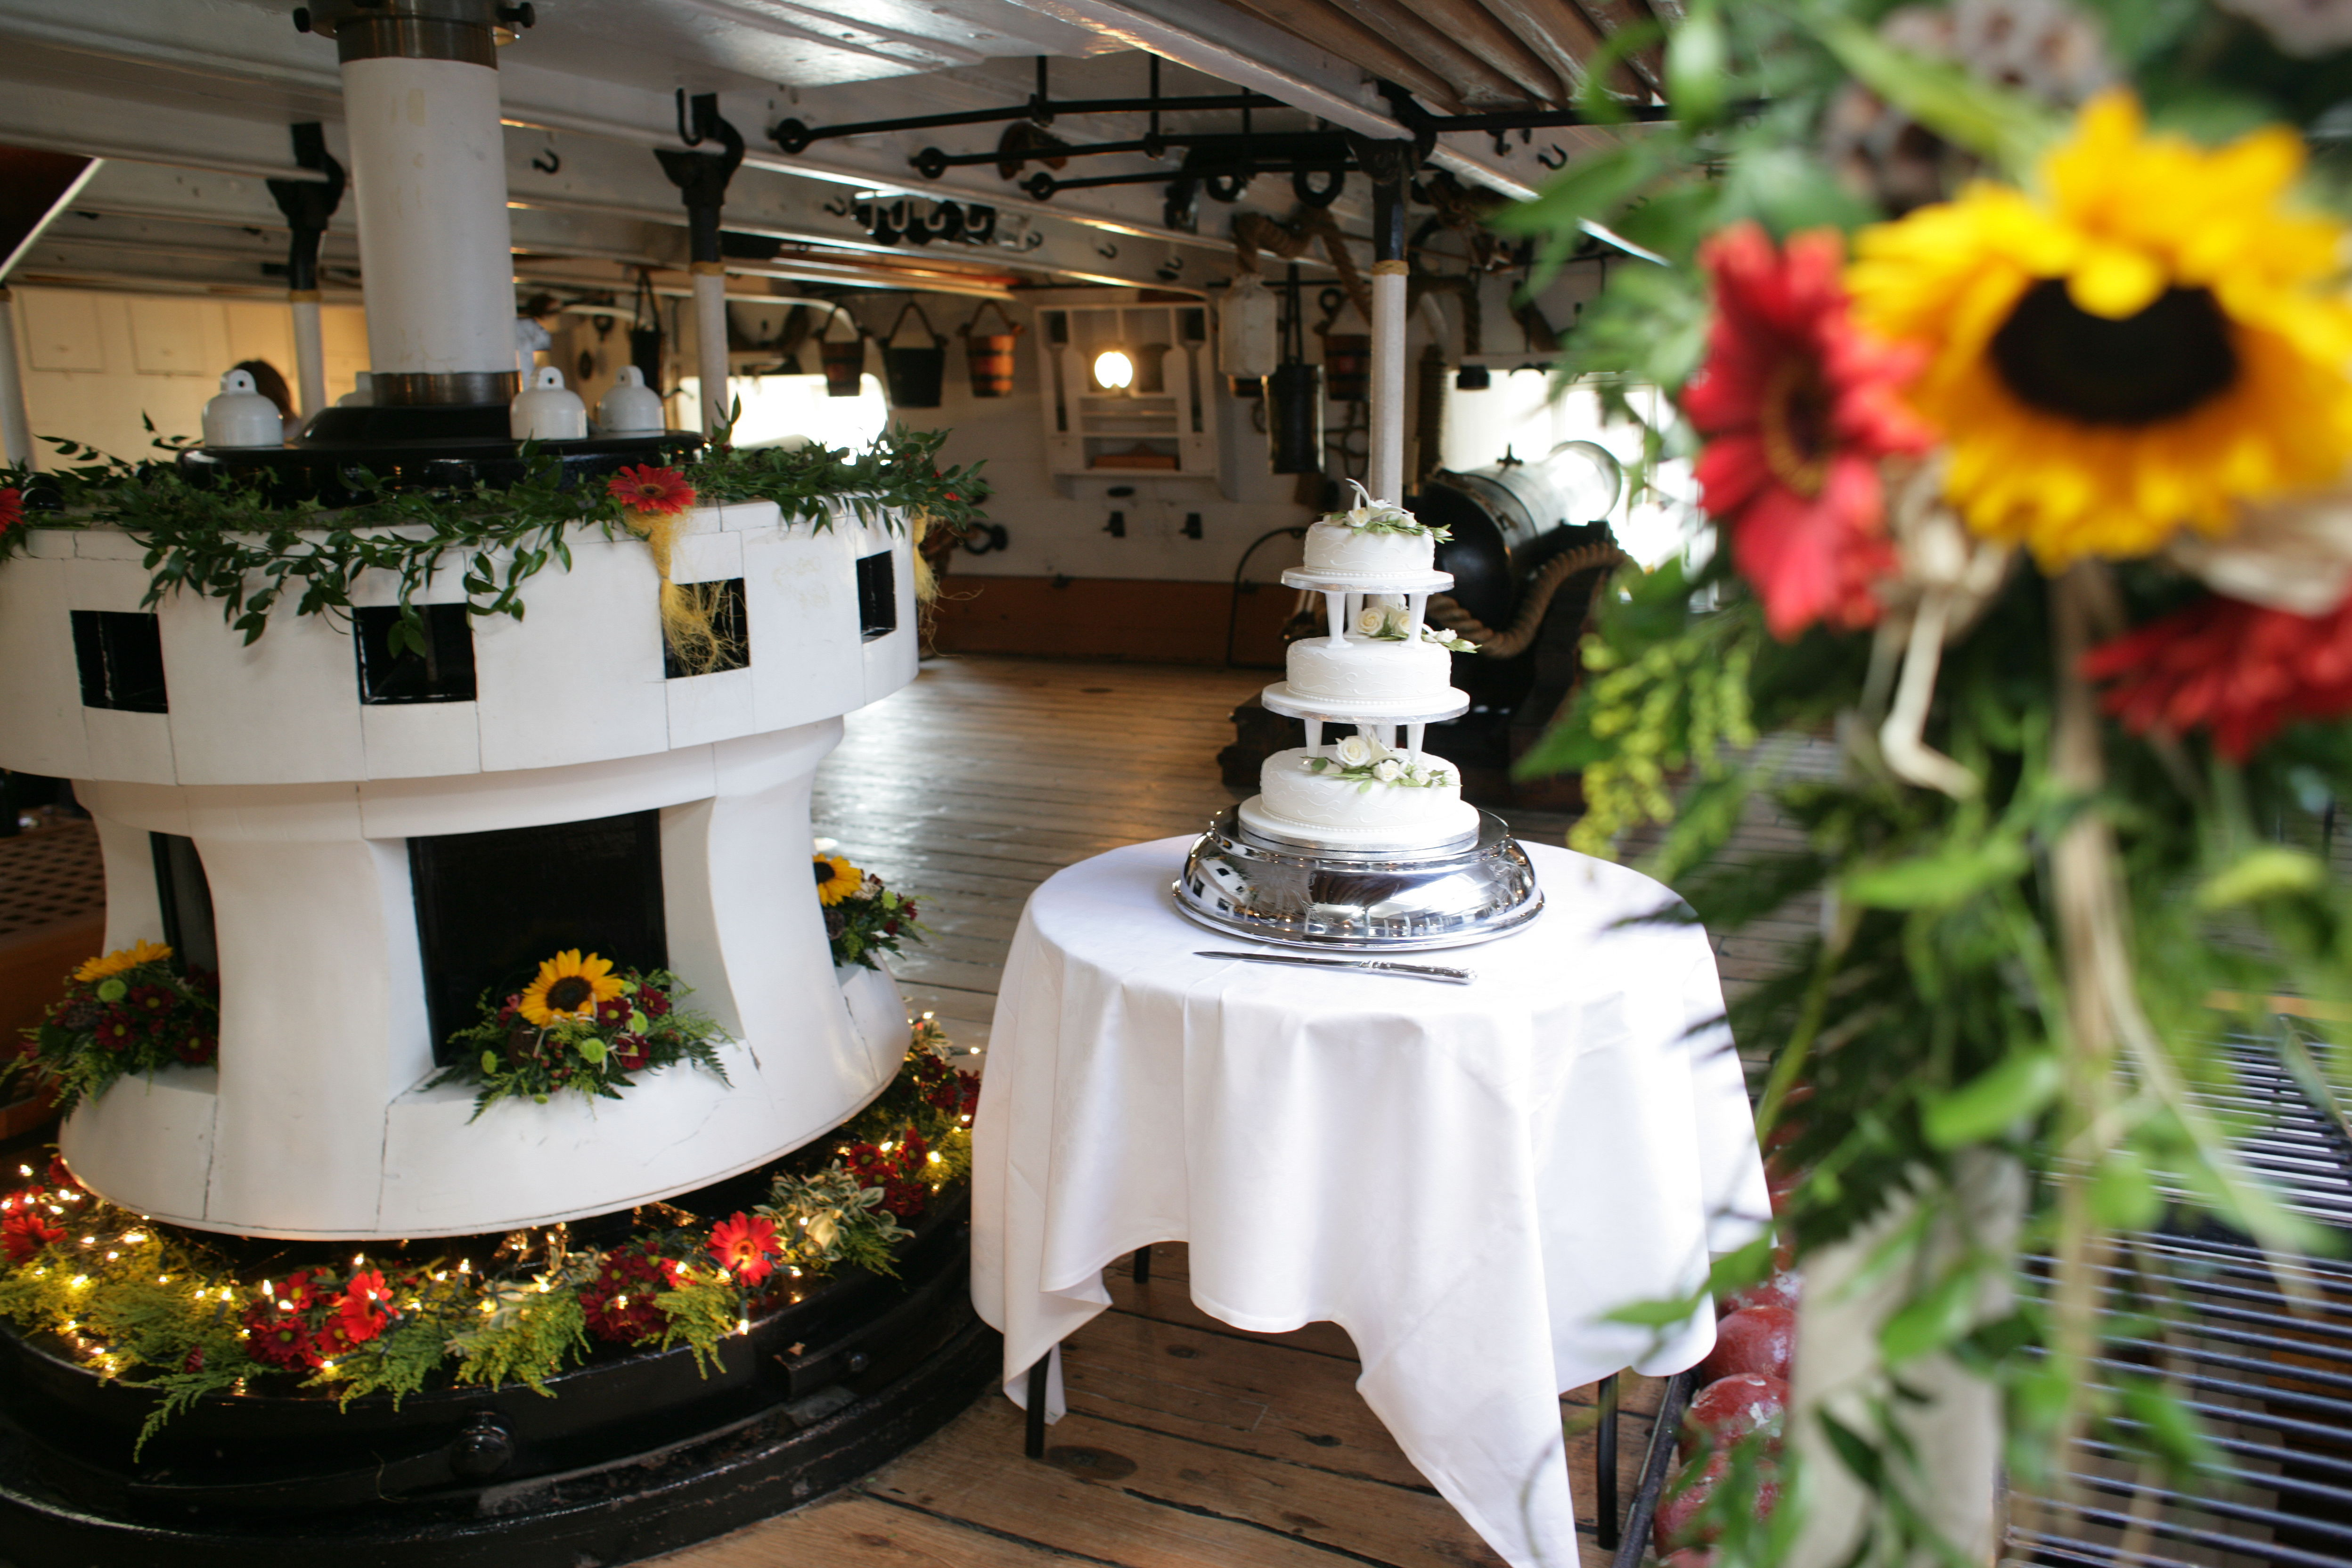 HMS Warrior's Capstan decorated with sunflowers and wildflowers for a wedding. There is a white wedding cake on a table next to it. 